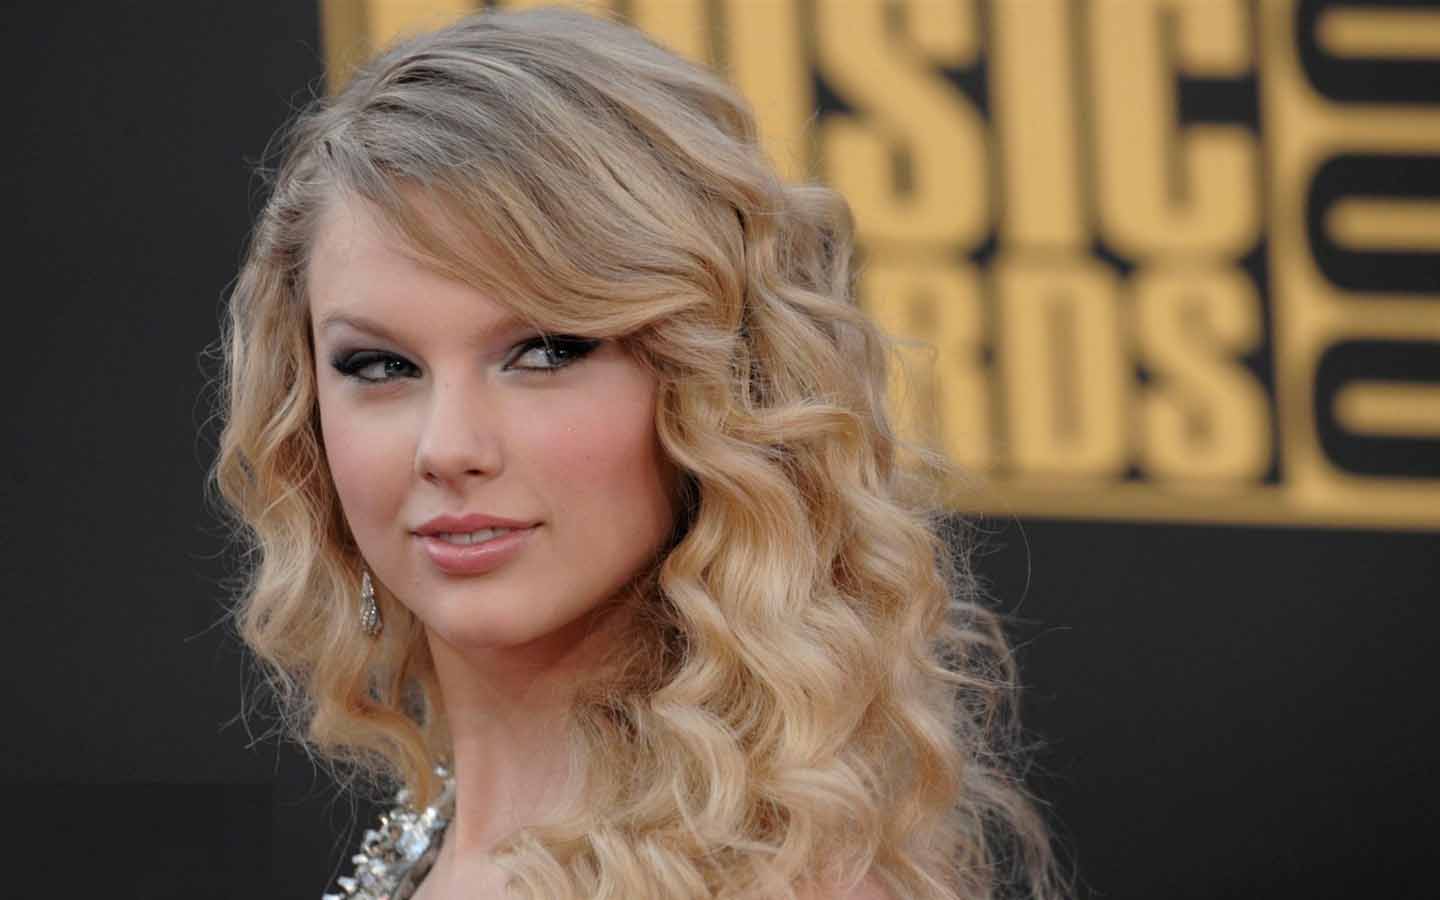 Fantastic Taylor Swift Beautiful Eye Look Up Still Mobile Background Free Hd Desktop Pictures